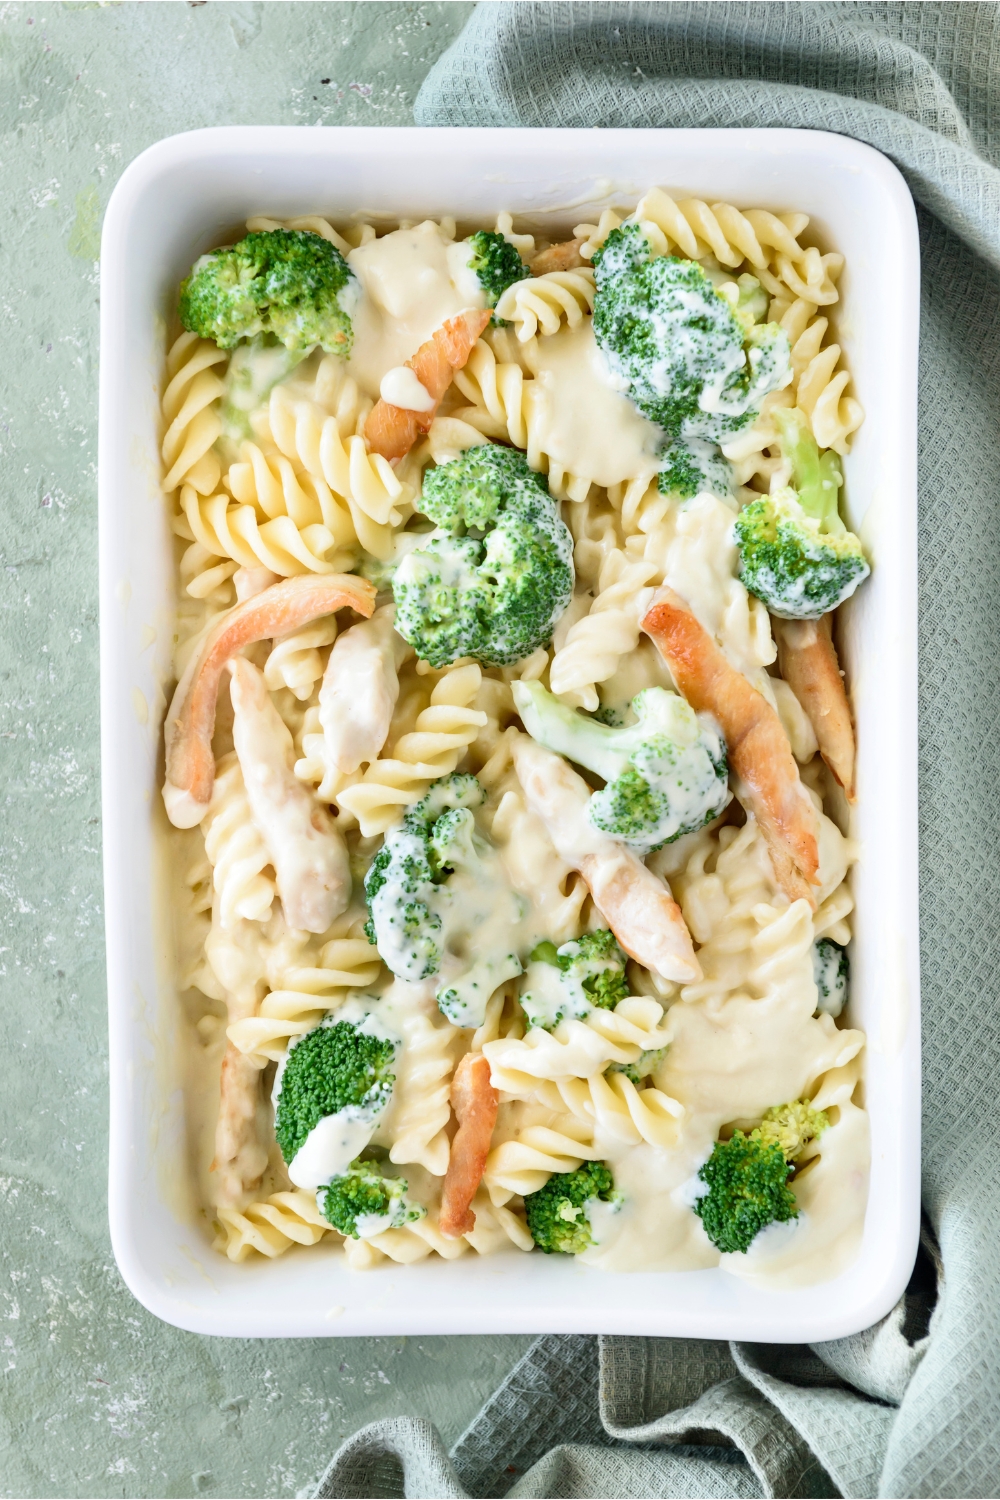 A baking dish filled with cooked pasta, broccoli, and chicken strips in a creamy sauce.